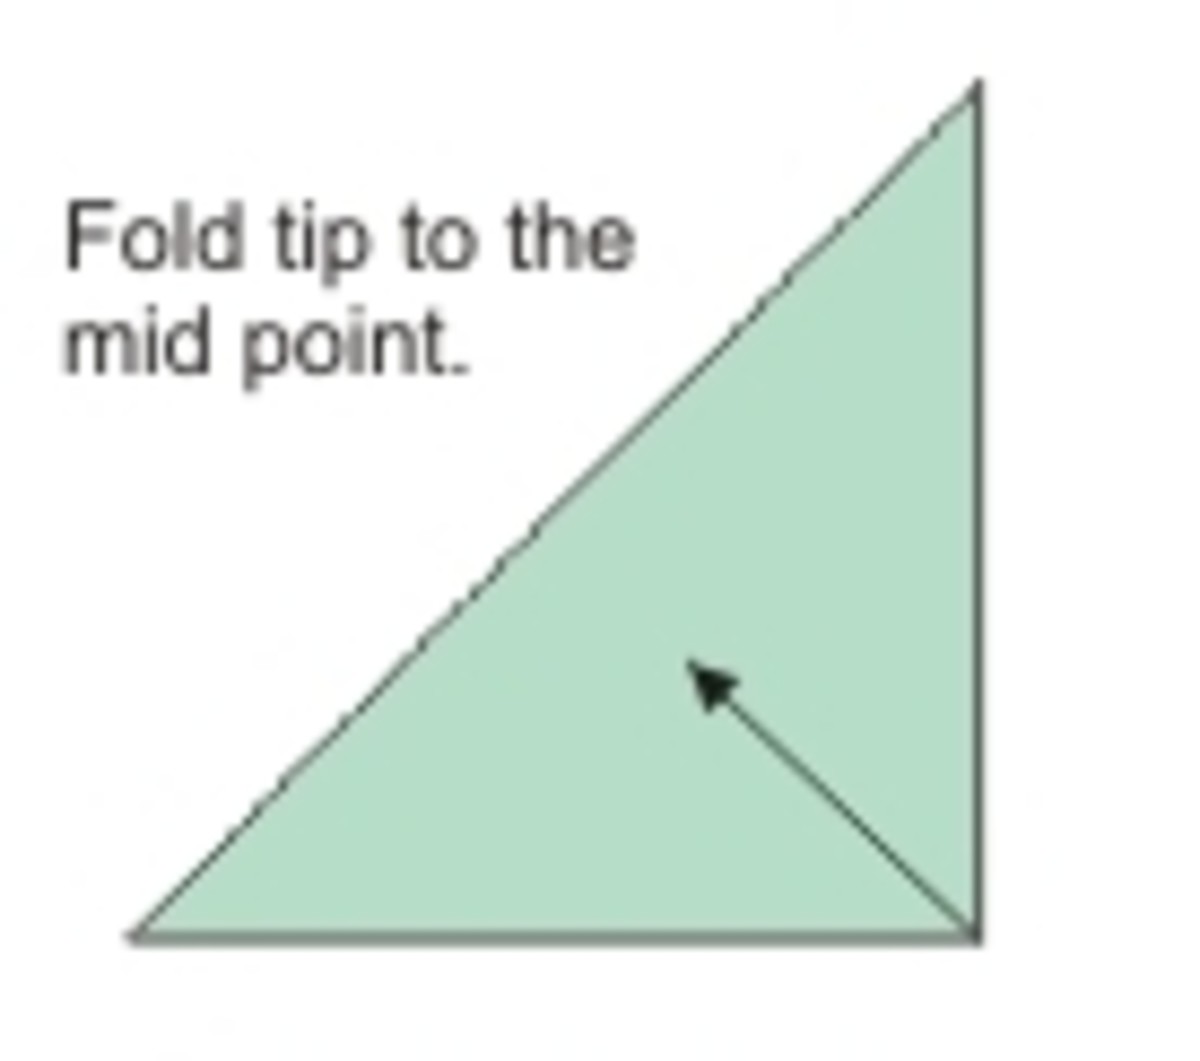 Fold the tip to the mid point.